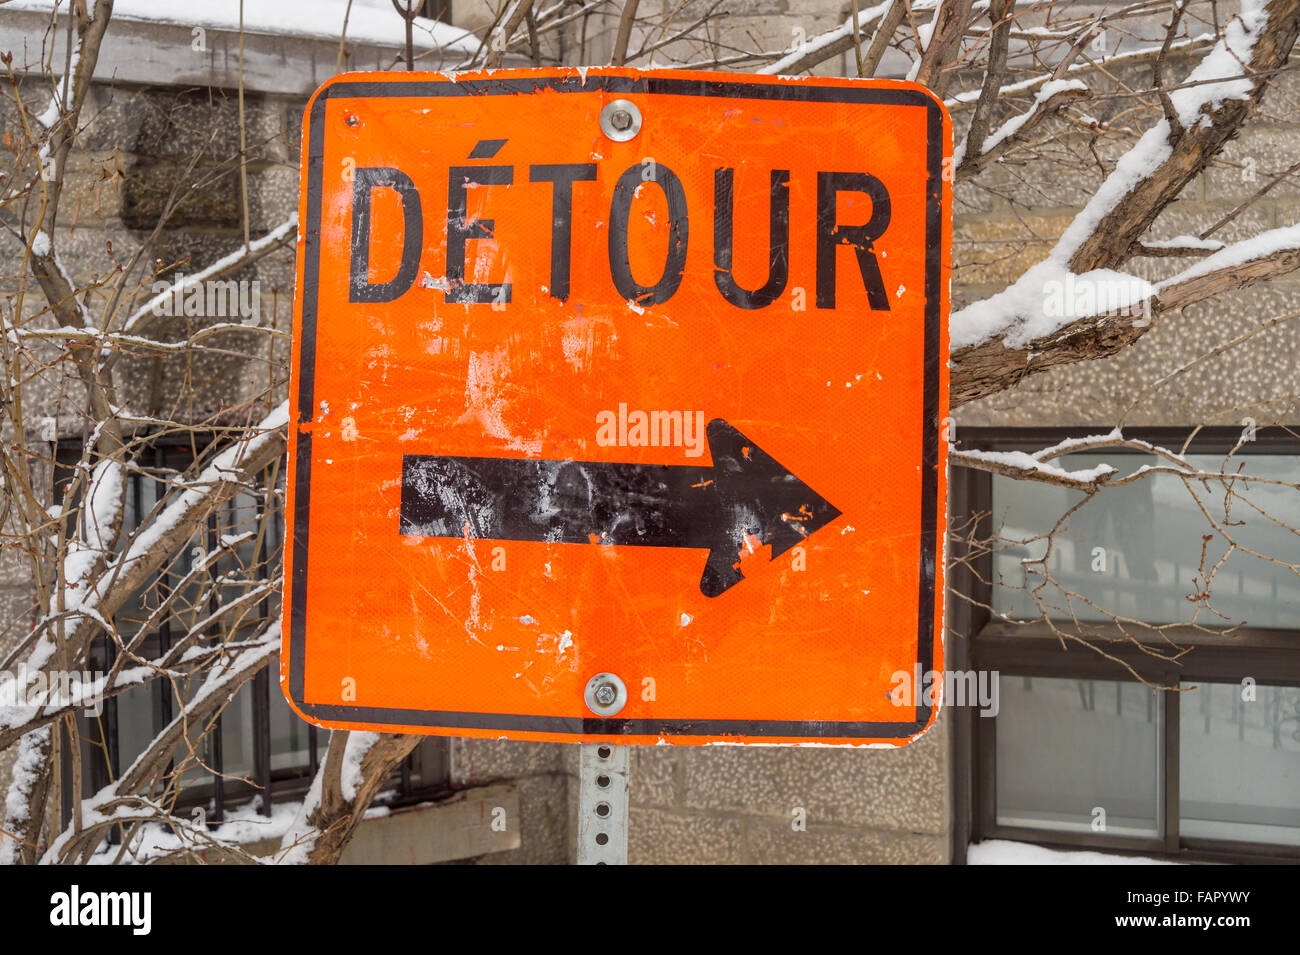 A detour road sign in Quebec, Canada Stock Photo